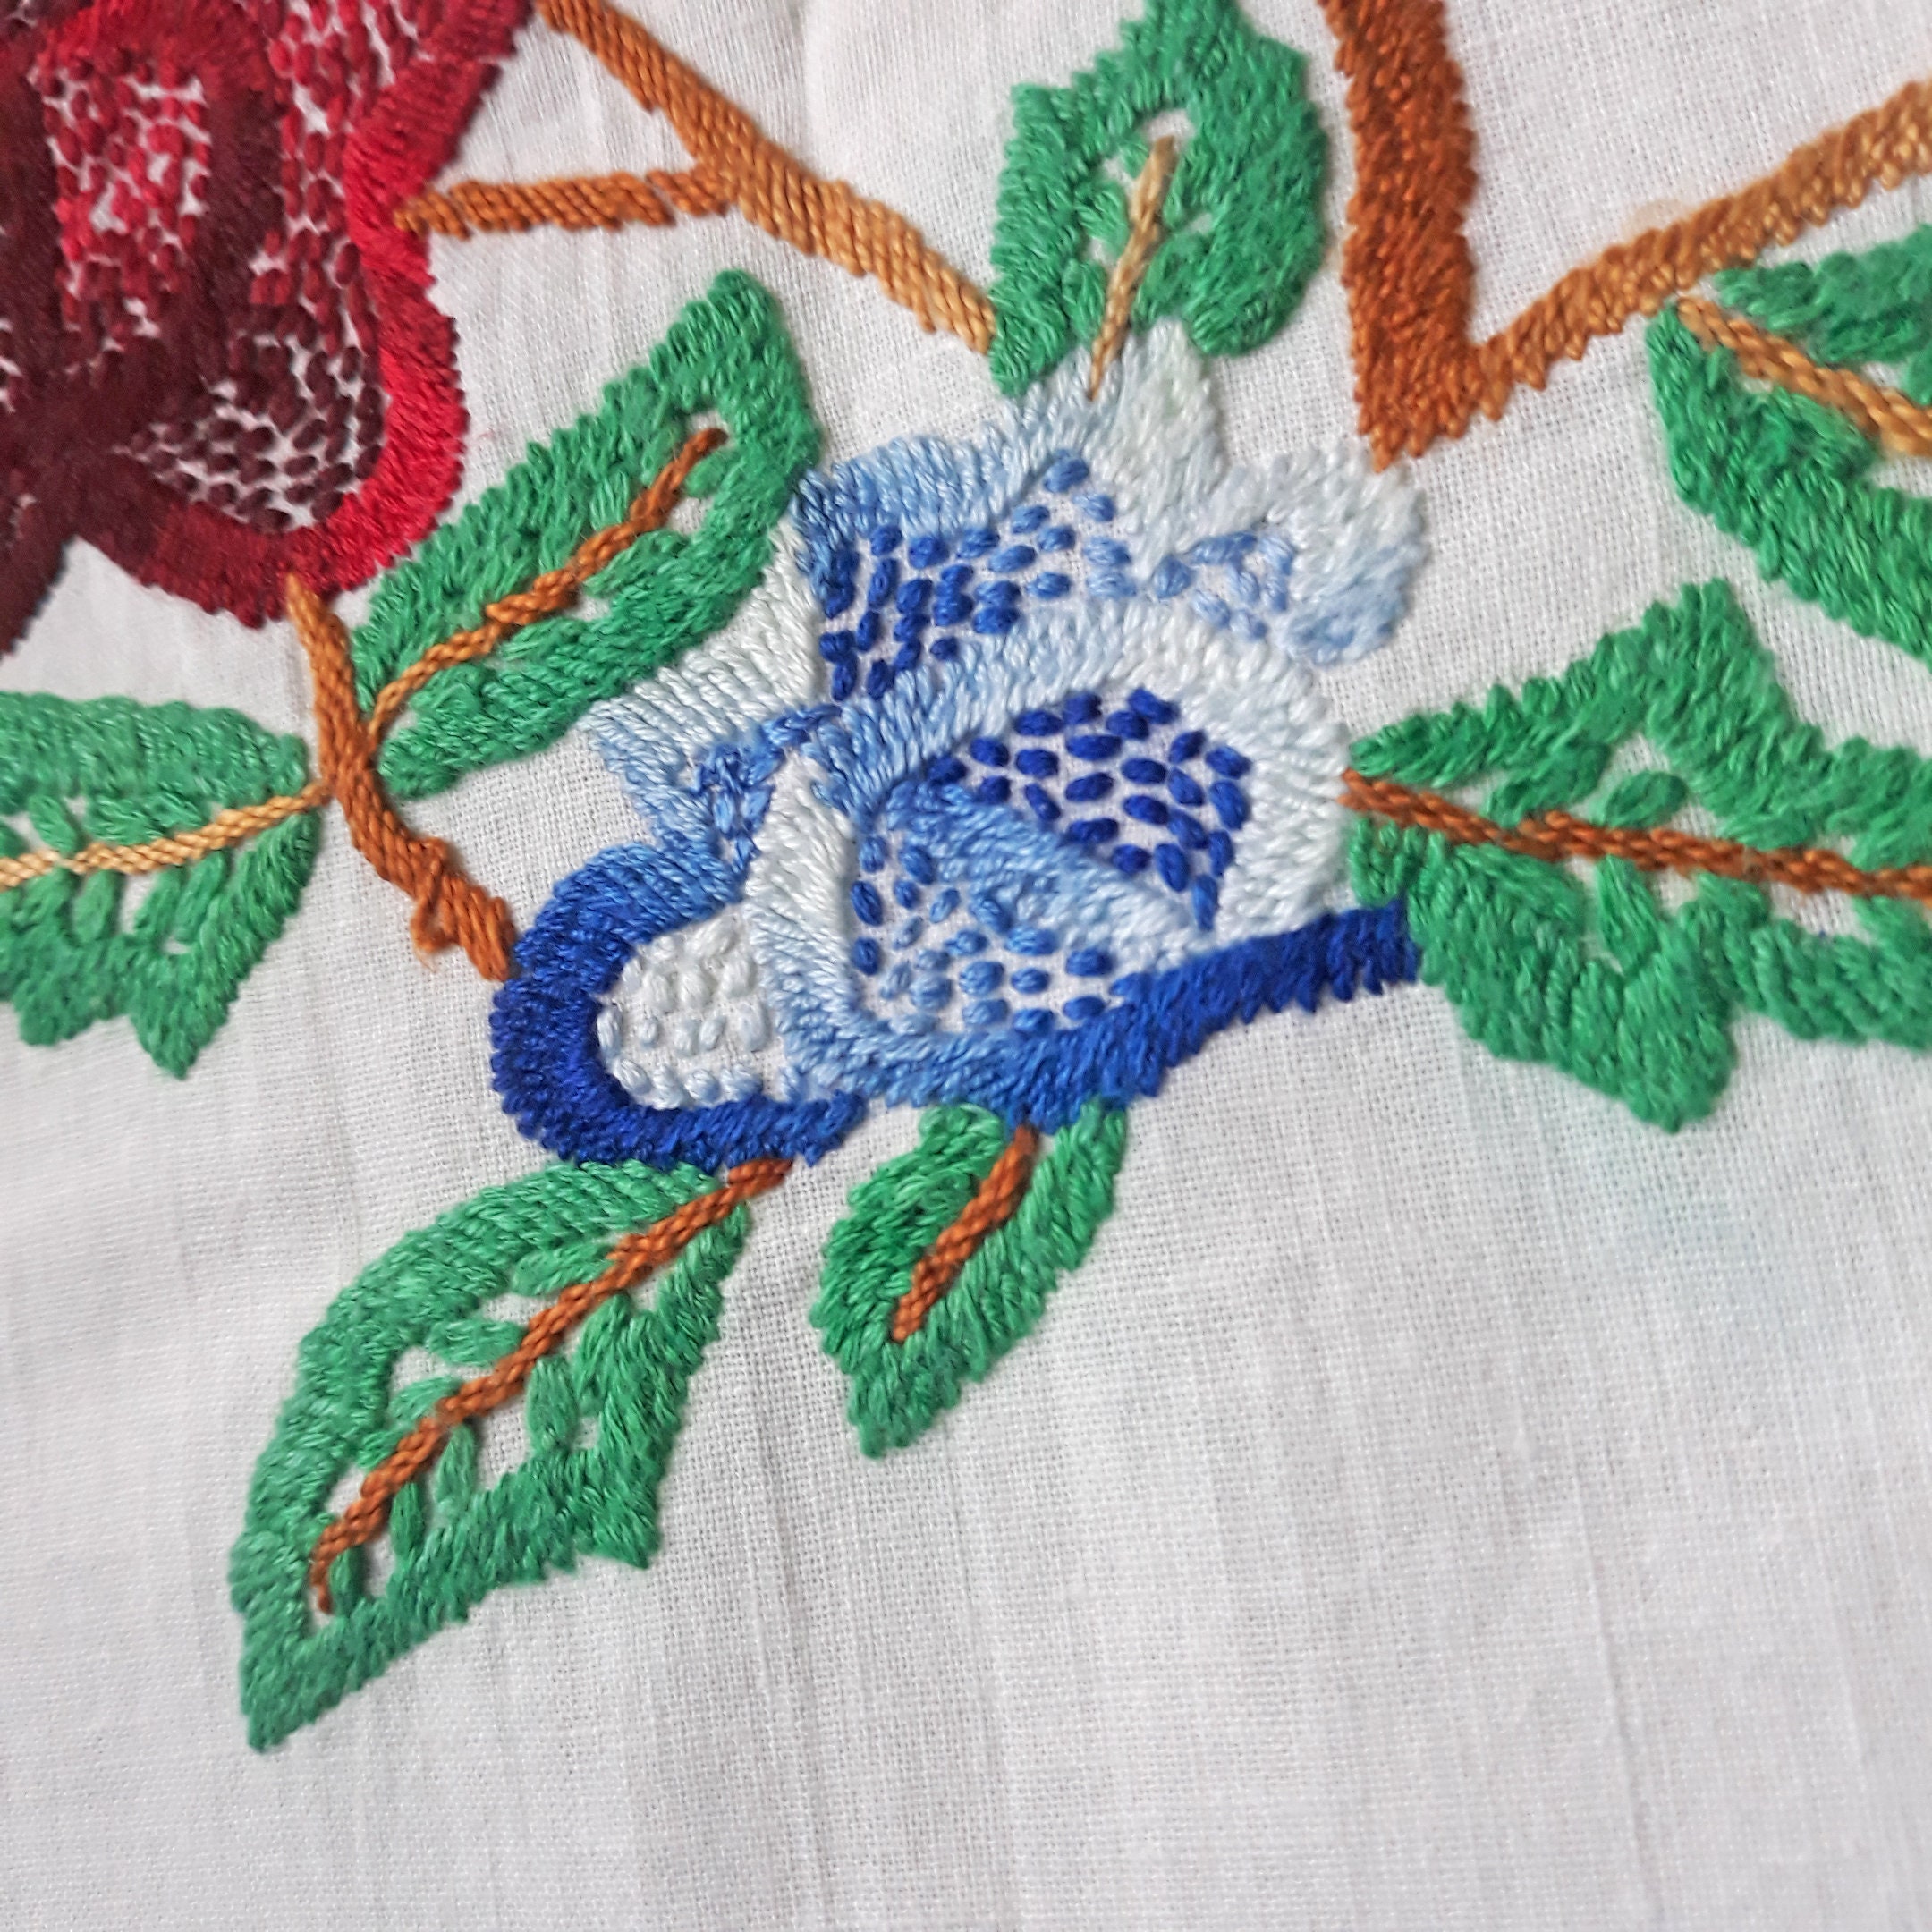 Roses embroidery Vintage white cotton patch Handmade | Etsy